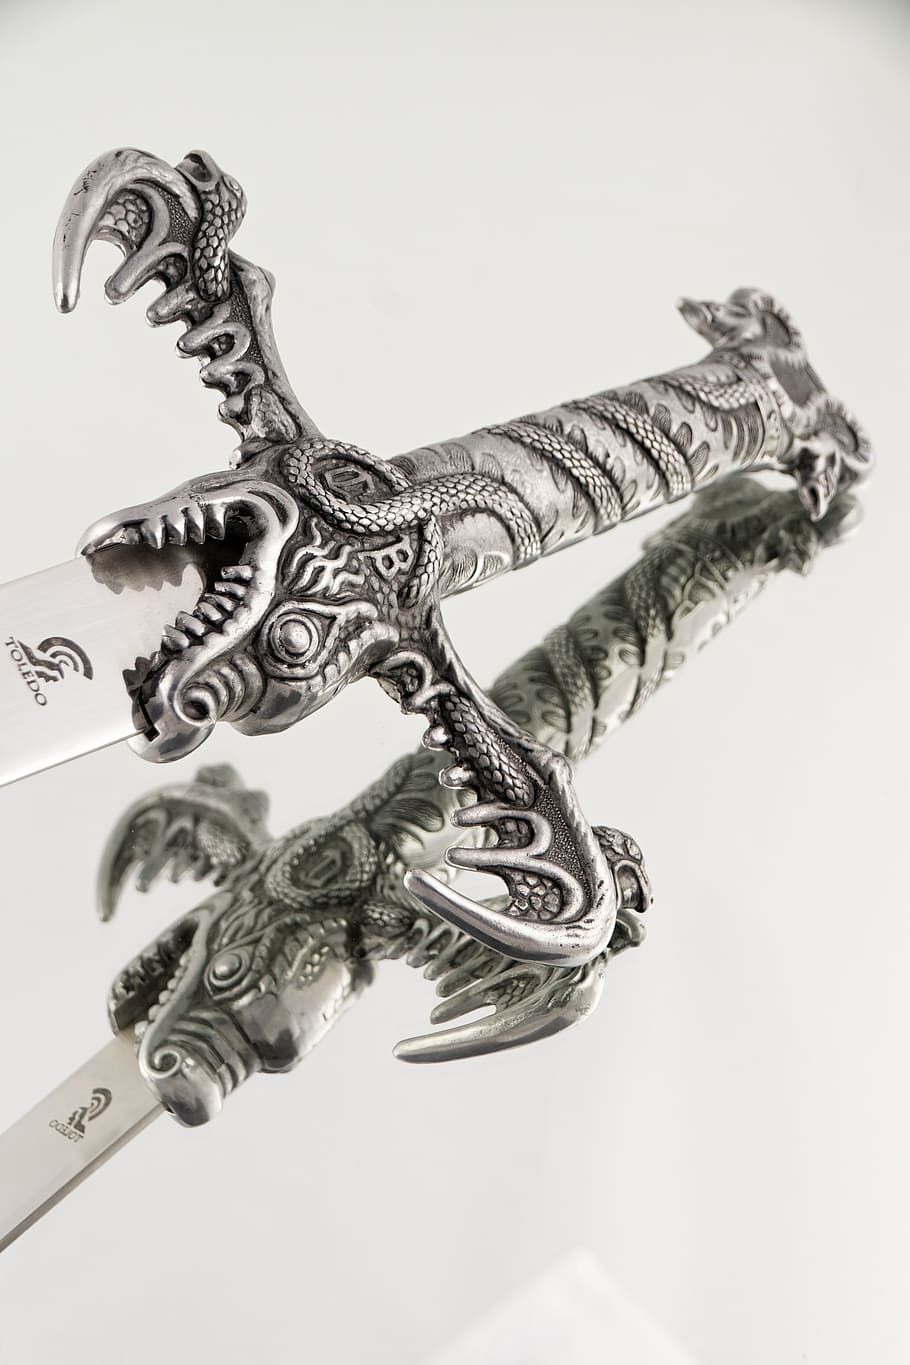 close-up photography, gray, sword, handle, ornament, weapon, knife, fight, indoors, art and craft